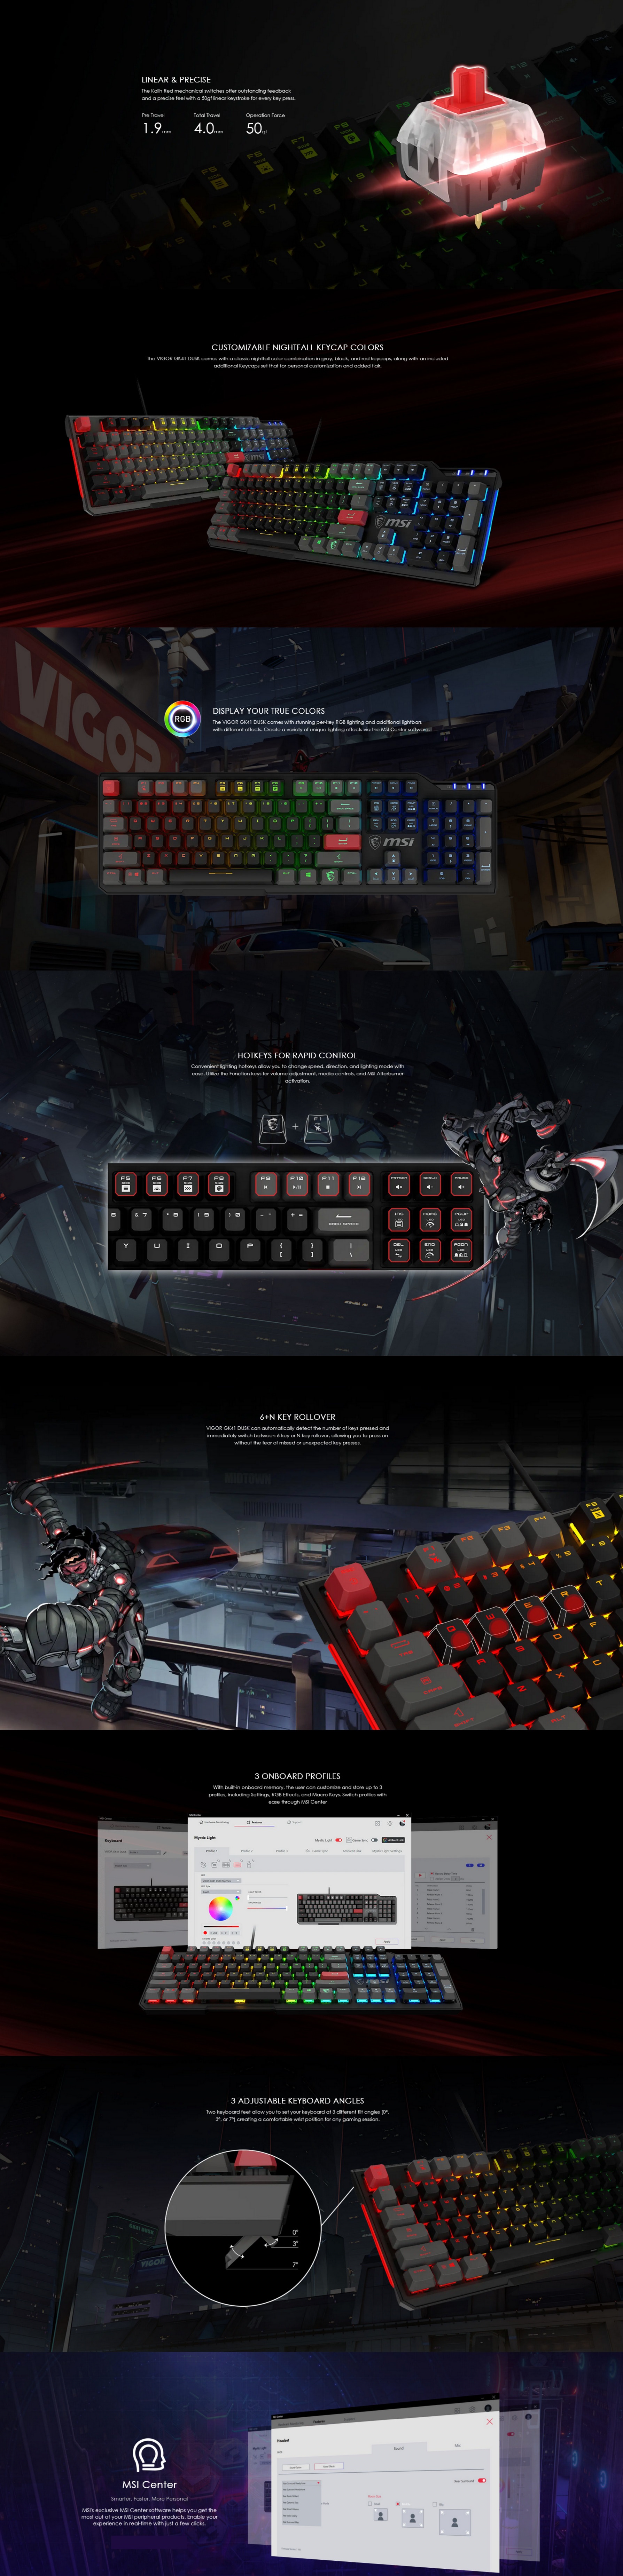 A large marketing image providing additional information about the product MSI VIGOR GK41 DUSK Gaming Keyboard - Kailh Red - Additional alt info not provided